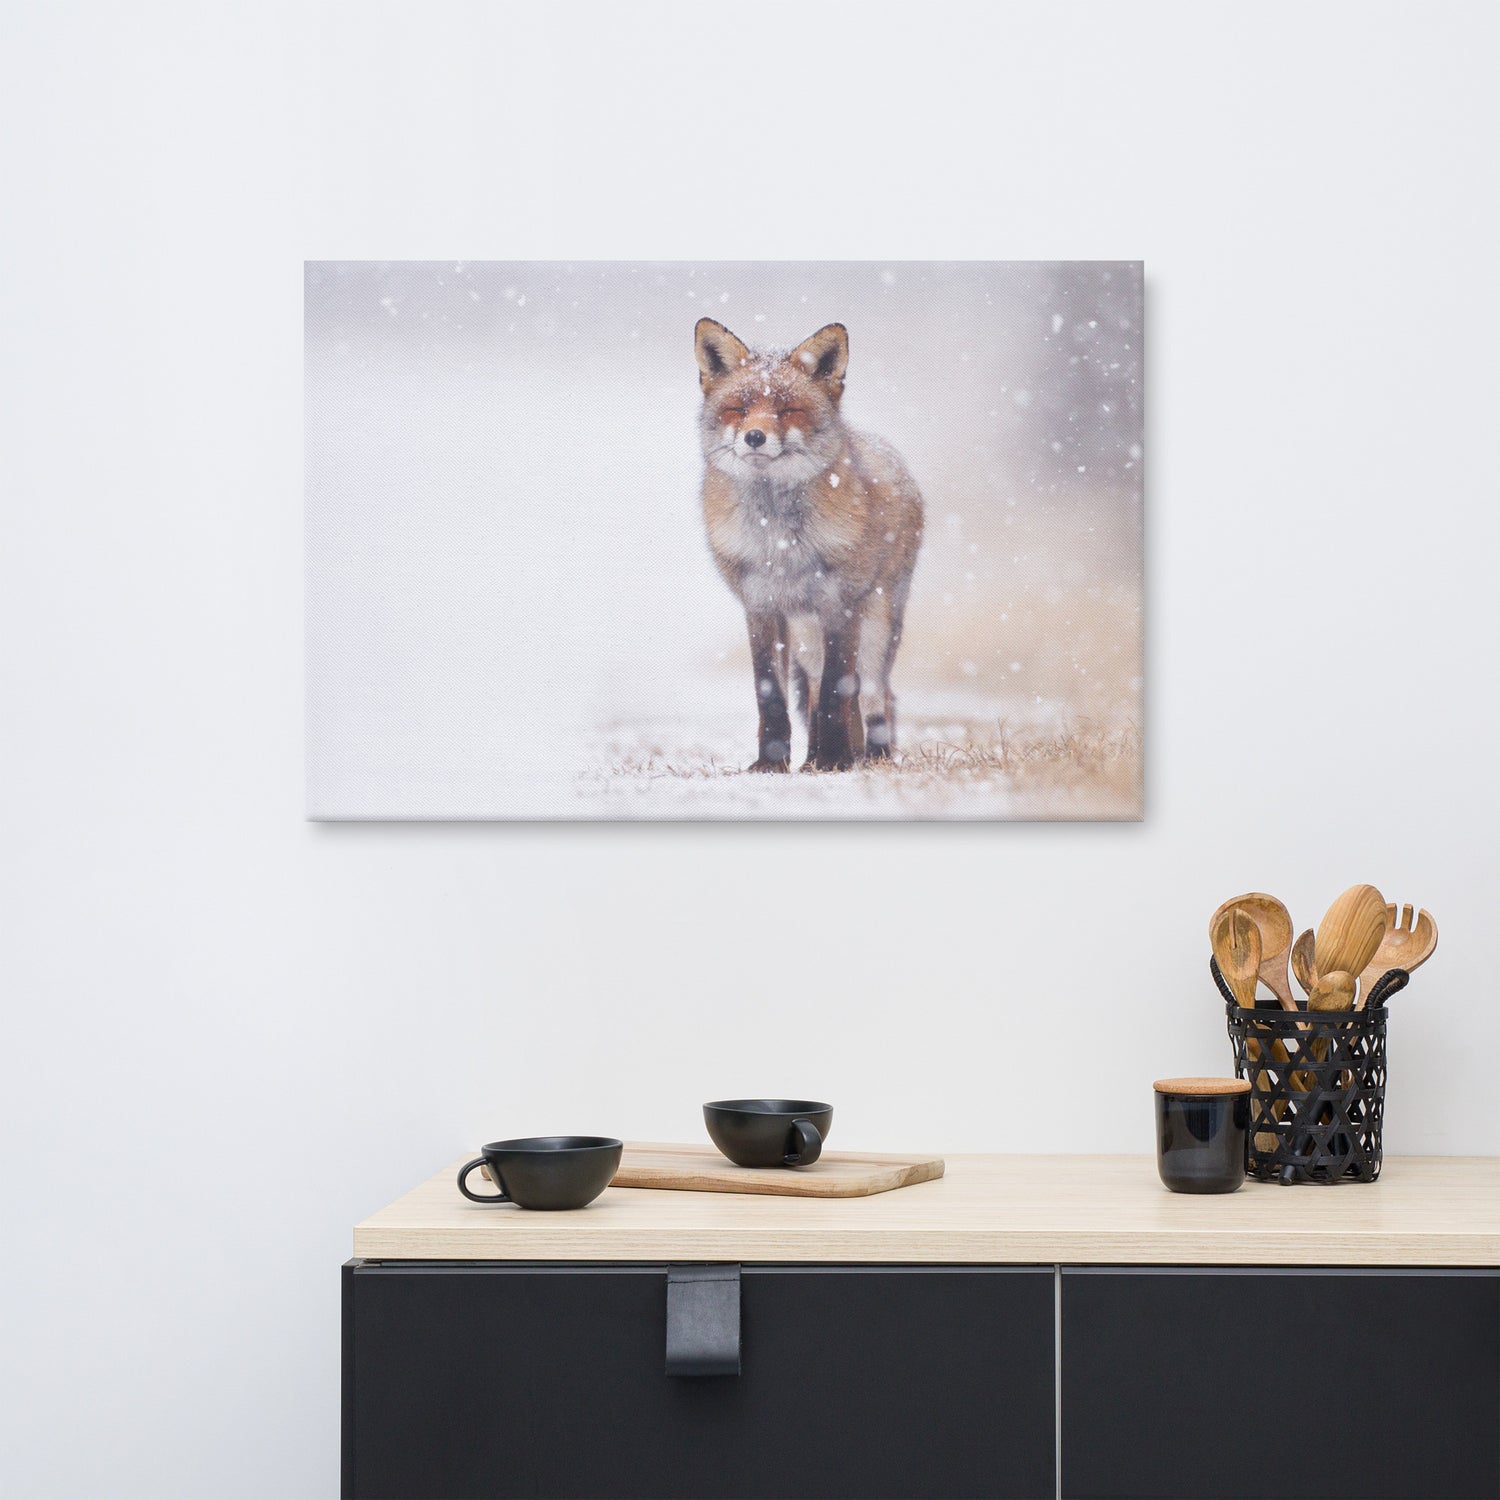 Affordability: Canvas prints offer an excellent balance of quality and value. They provide an accessible way to enhance your home with the beauty and impact of artwork without the high price tag of original paintings.